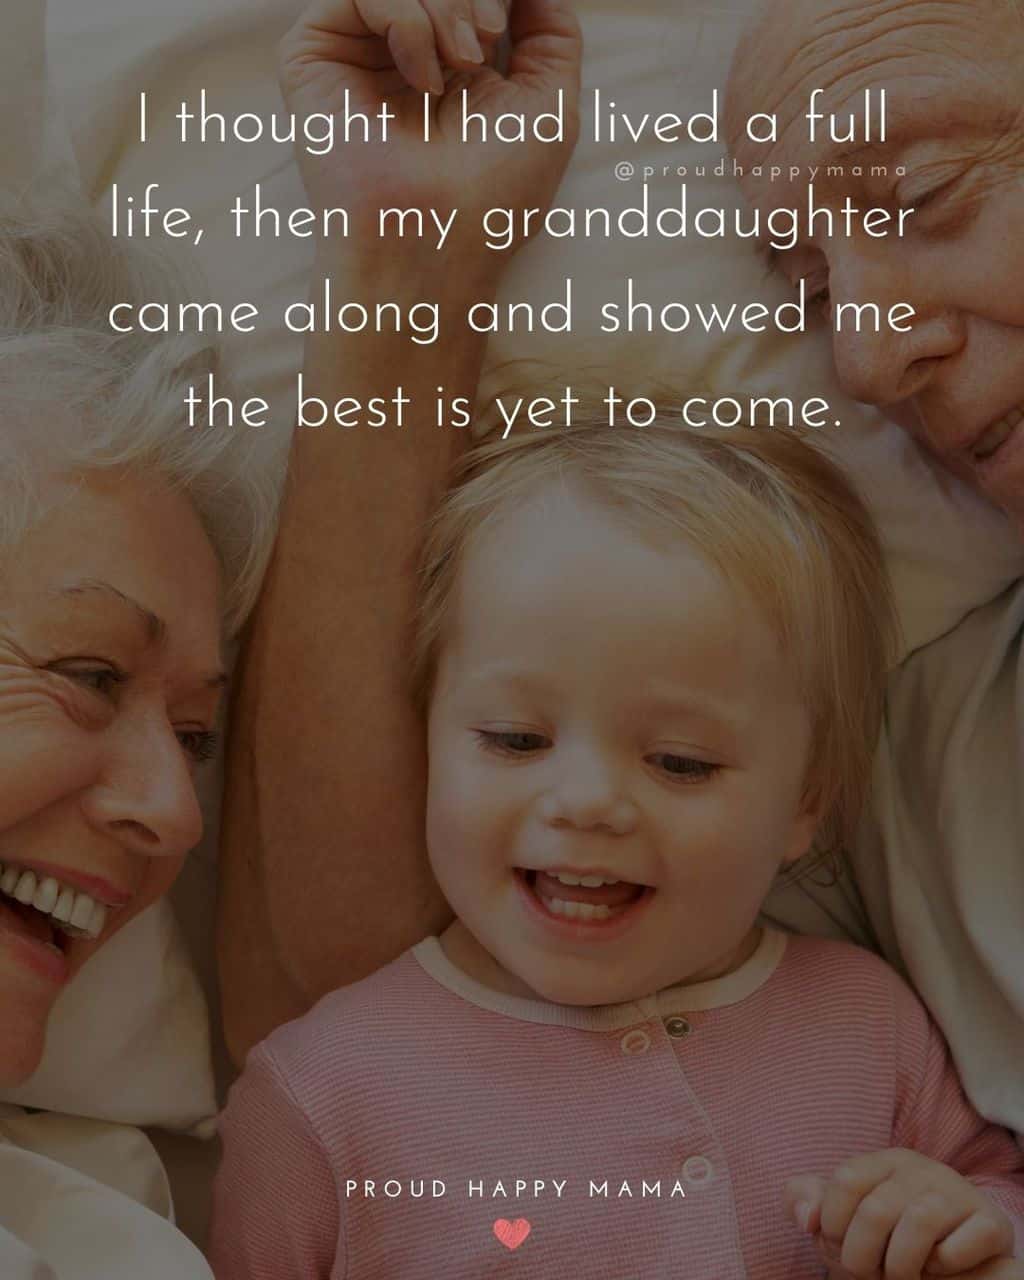 Granddaughter Quotes - I thought I had lived a full life, then my granddaughter came along and showed me the best is yet to come.